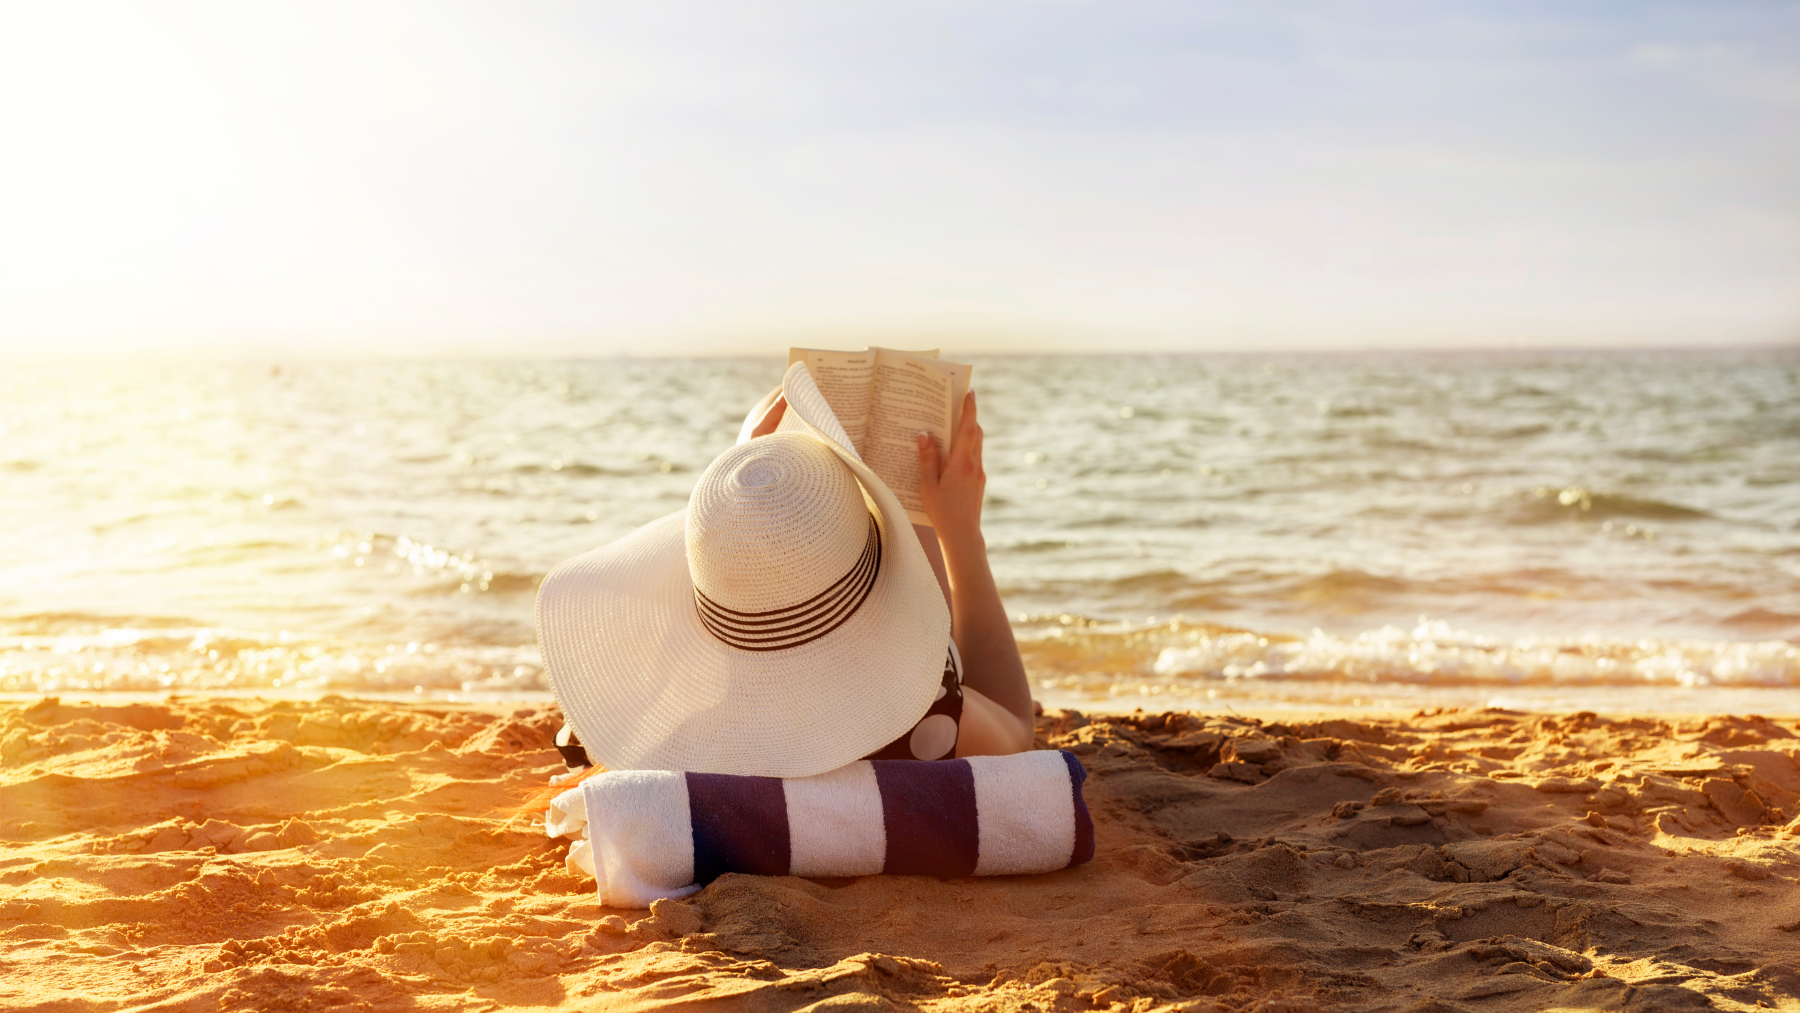 Love to read? Recommendations for Summer (and beyond)!